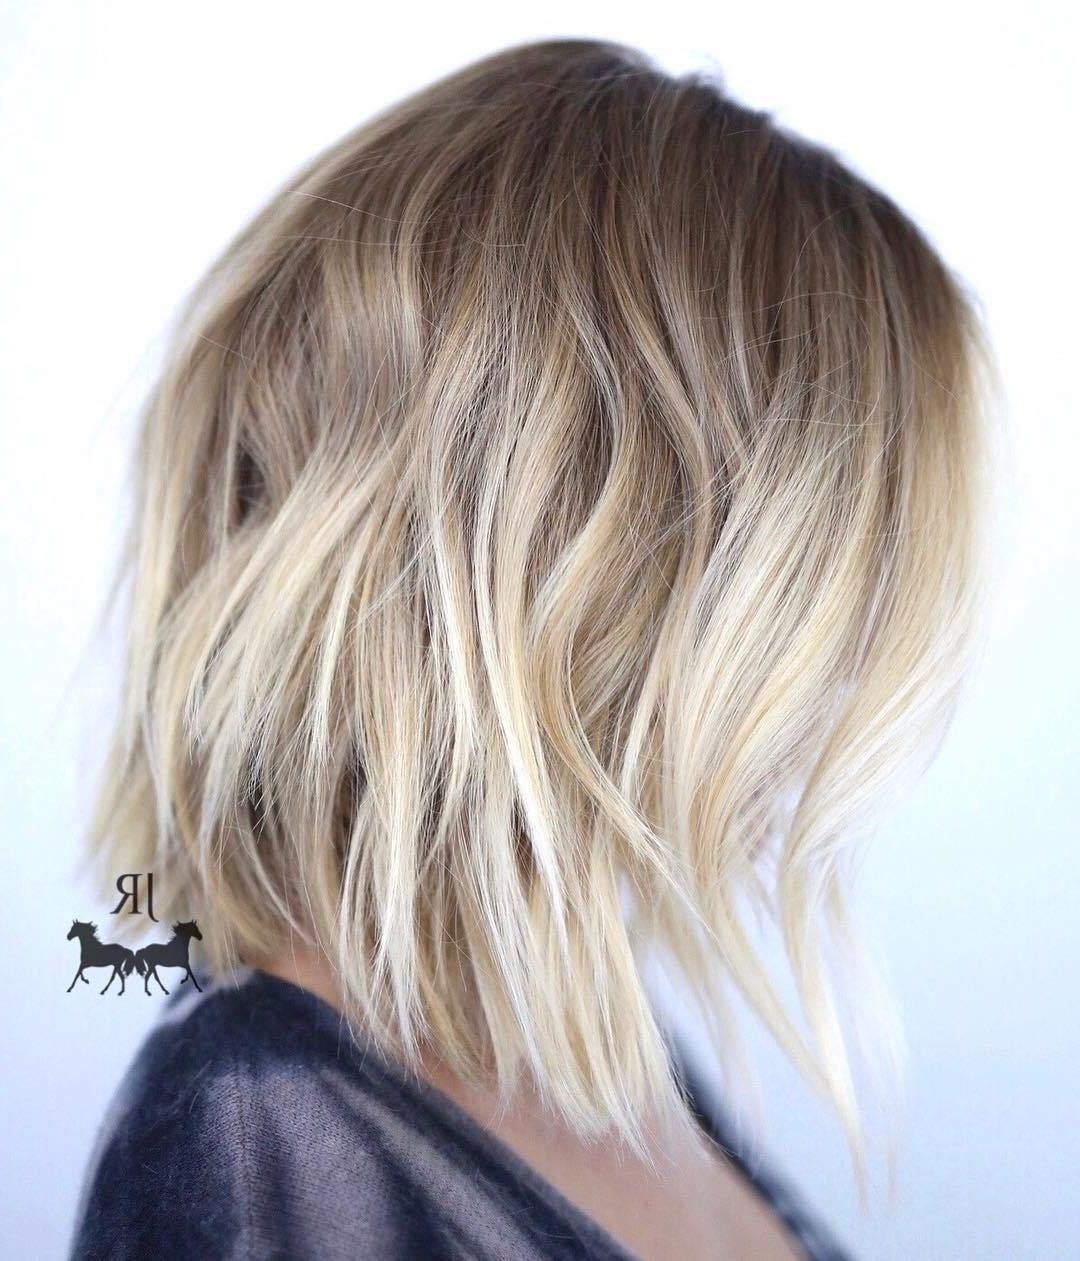 60 Beautiful And Convenient Medium Bob Hairstyles | Medium Bob Hairstyles,  Hair Styles, Short Blonde Hair Within Most Current Classy Medium Blonde Bob Haircuts (View 5 of 25)